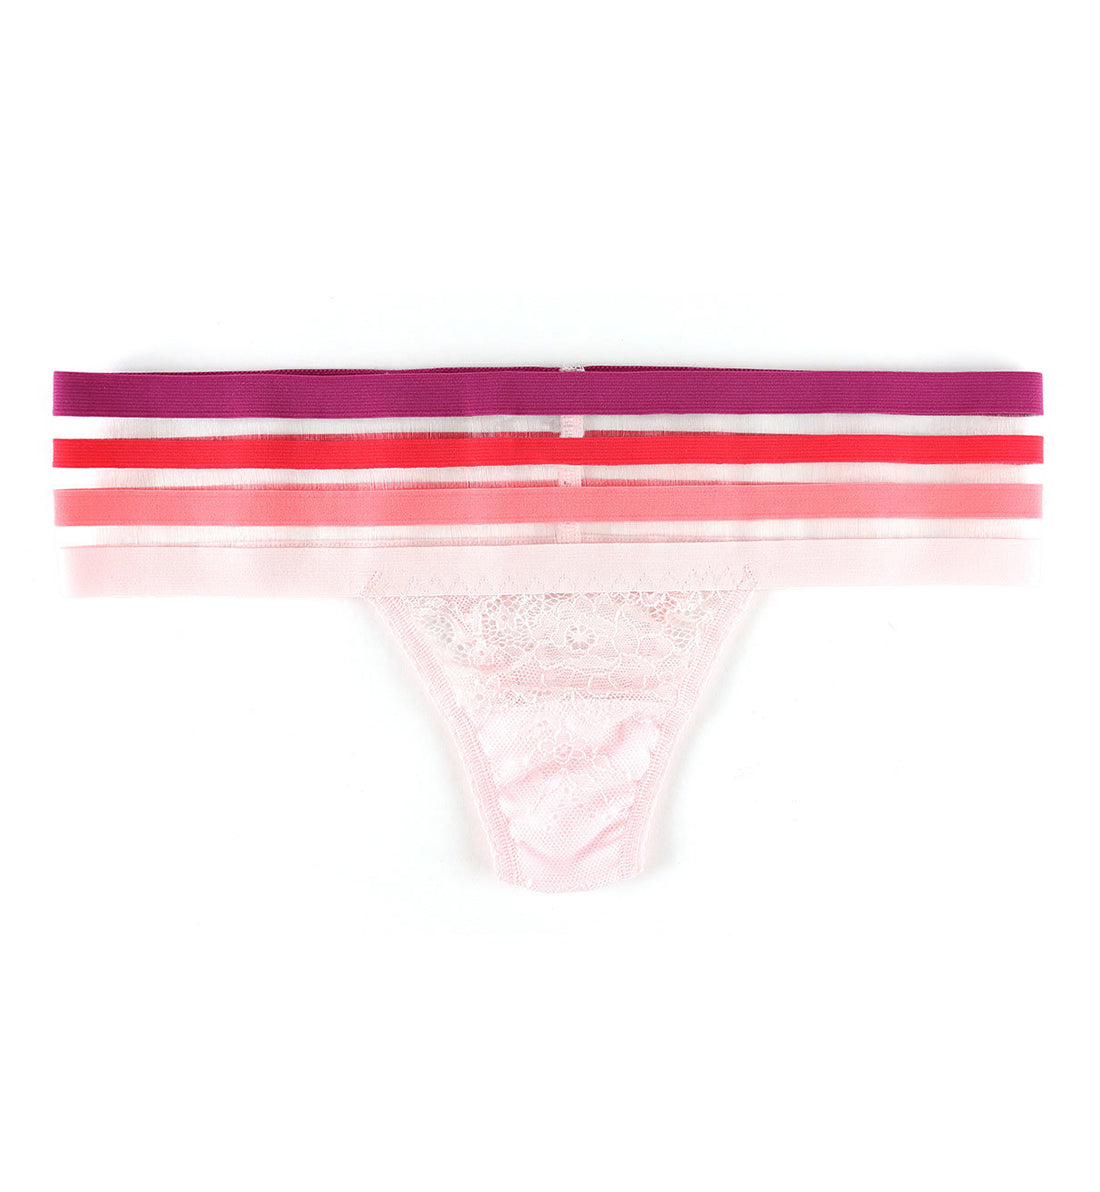 Hanky Panky Sunset Stripe Modern Low Rise Thong (6G1312),XS/S,Rosy Peach - Rosy Peach,XS/S